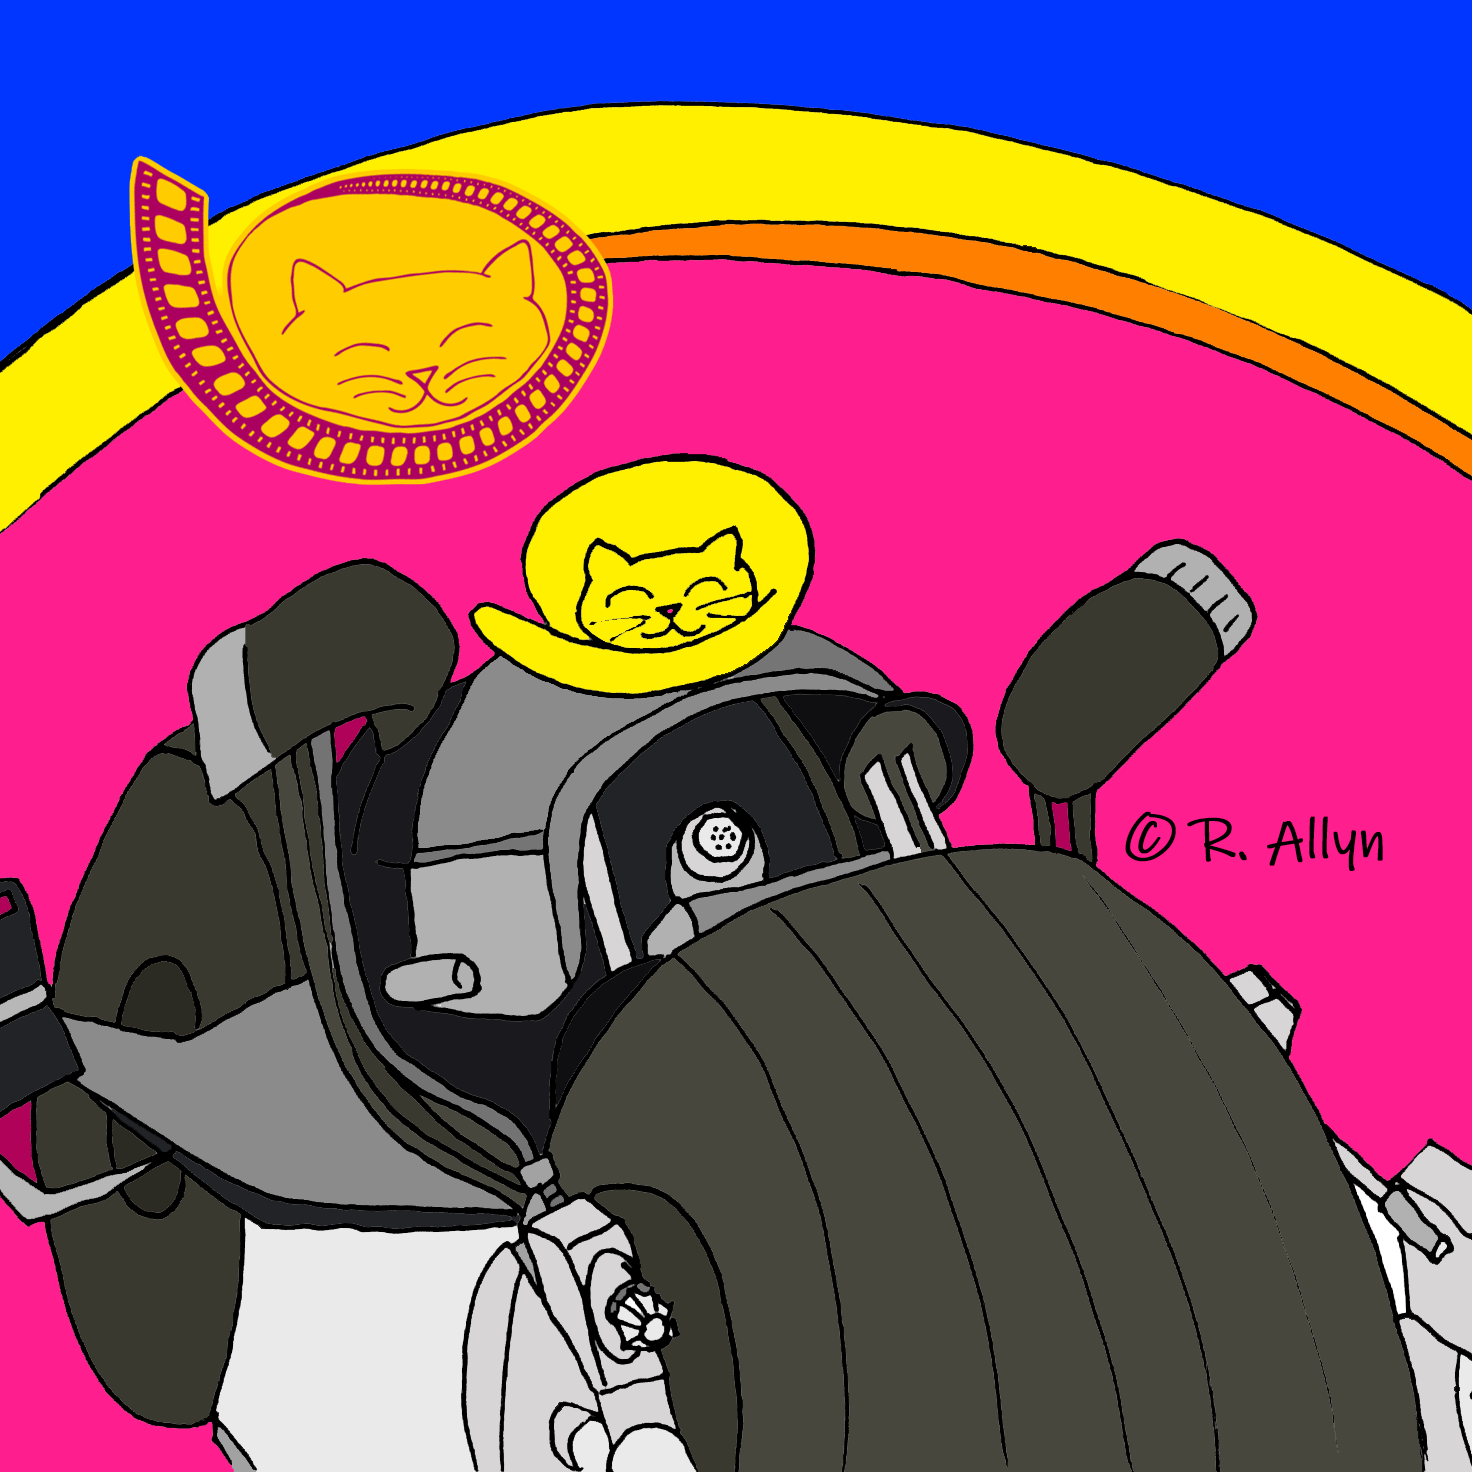 Illustration of a cat on the Dark Knight motorcycle